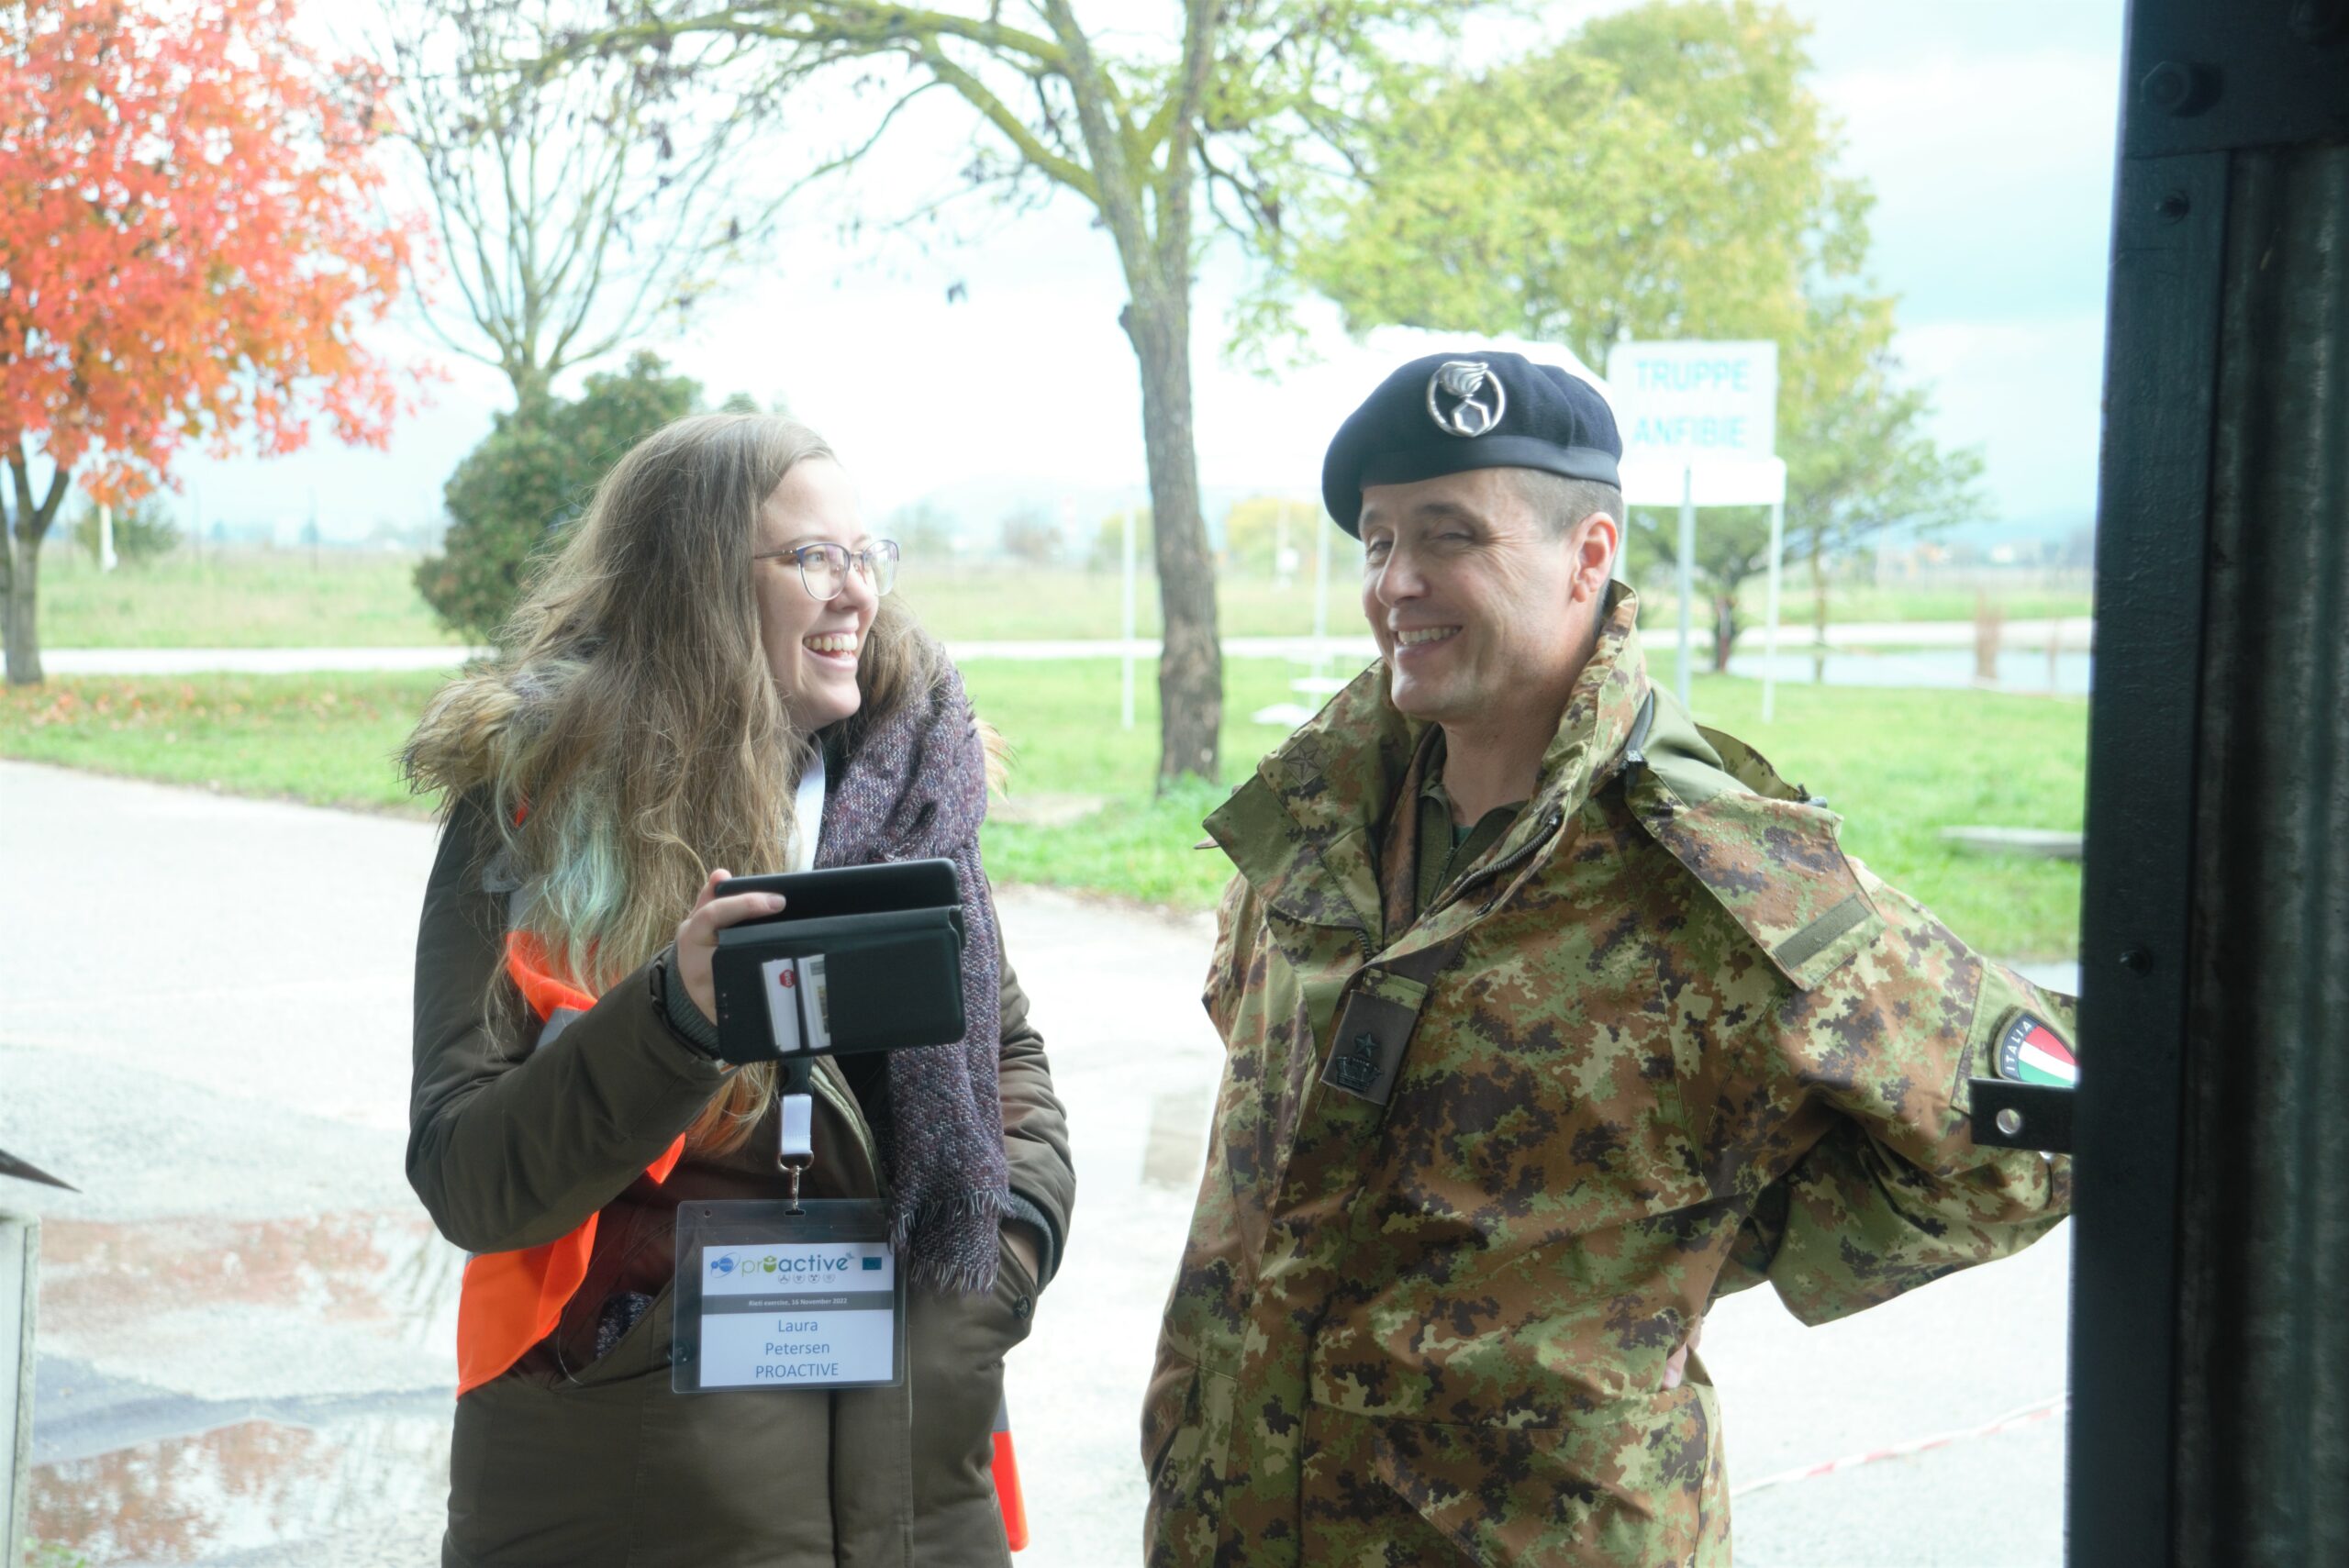 Two persons: a woman in orange tabard and man in a military uniform are standing and looking each other and smiling. 